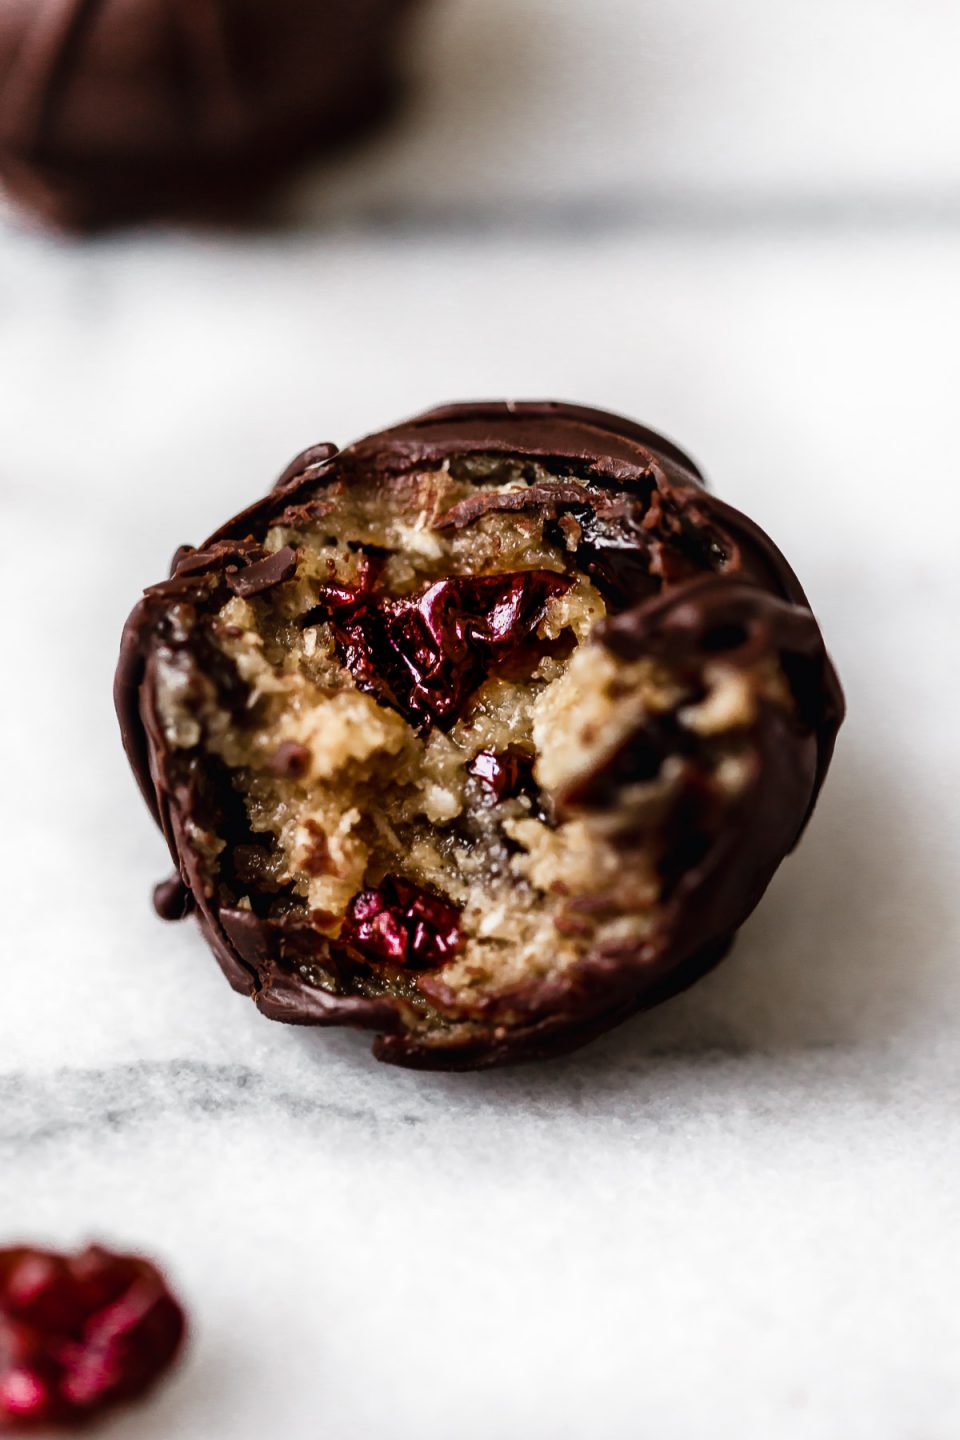 Chocolate-covered vegan cookie dough bite sitting on a white surface. A bite has been taken out of the ball, revealing an inside studded with ruby-red Montmorency tart cherries.